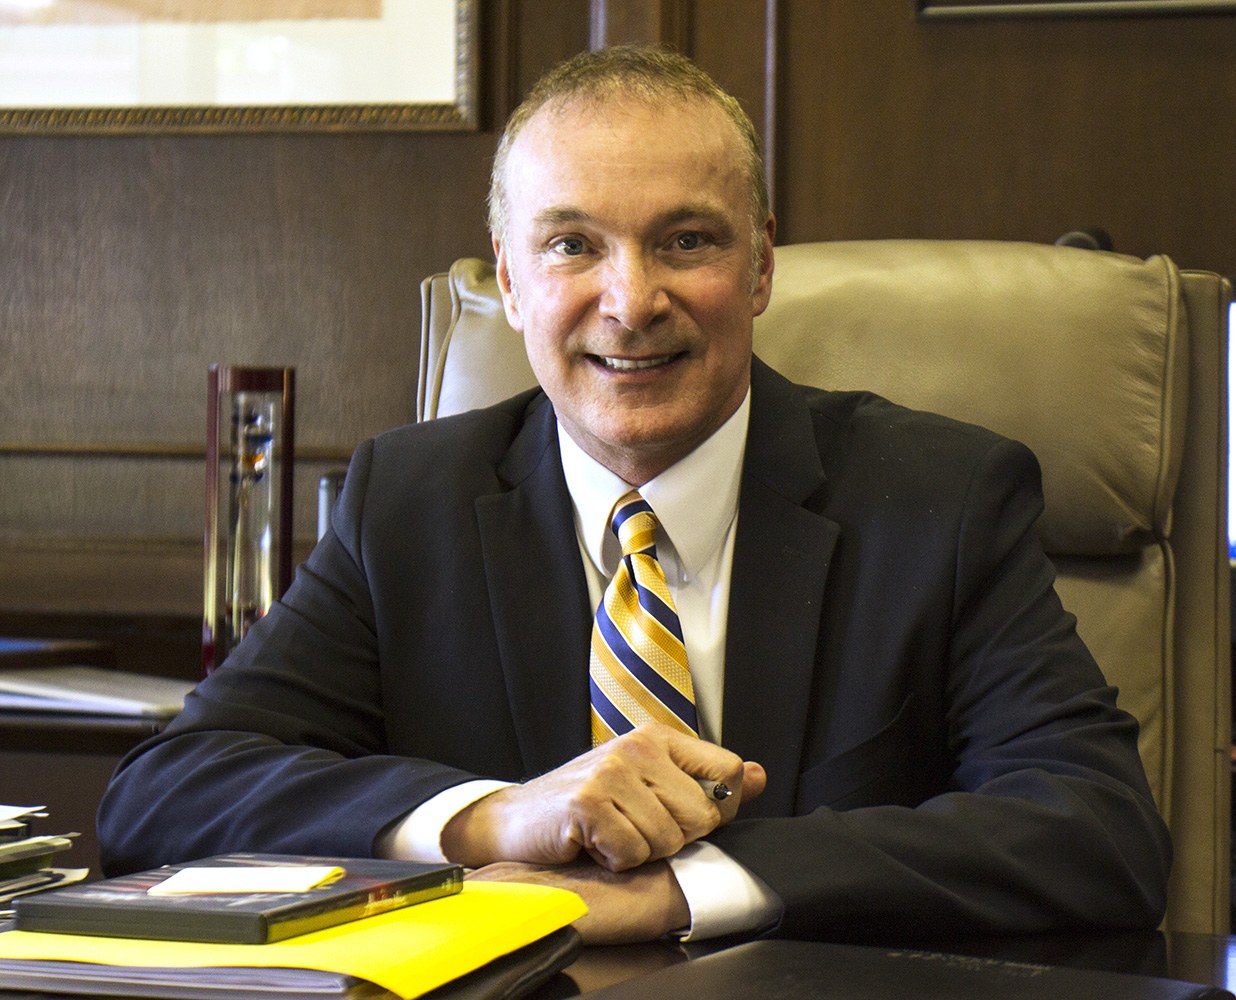 OCCC president announces plans to retire in July 2015